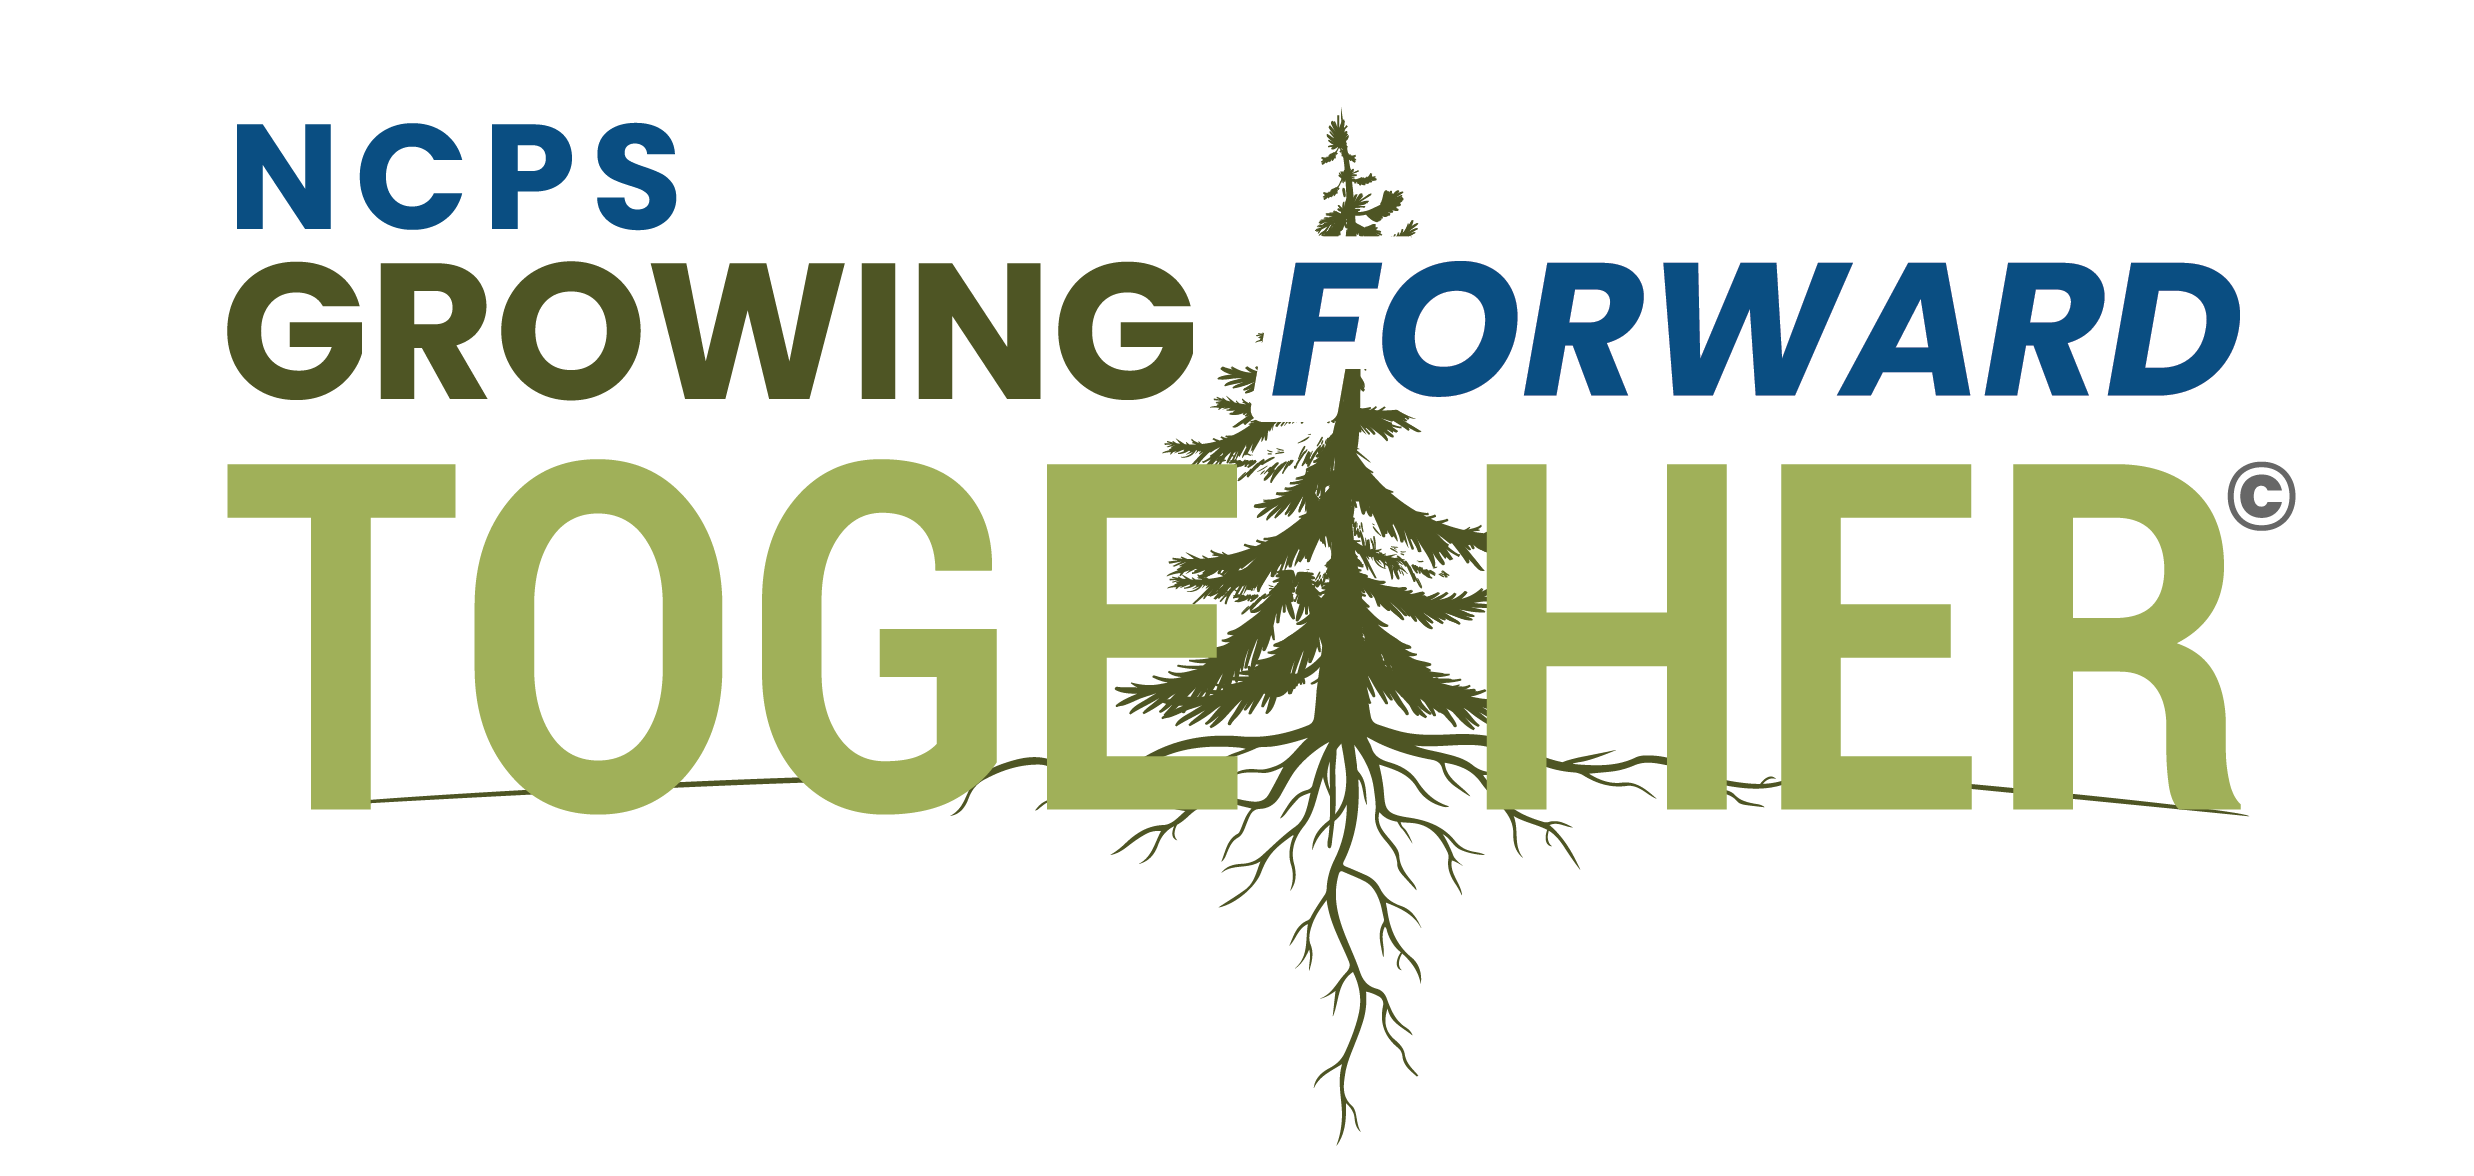 NCPS Growing Forward Together